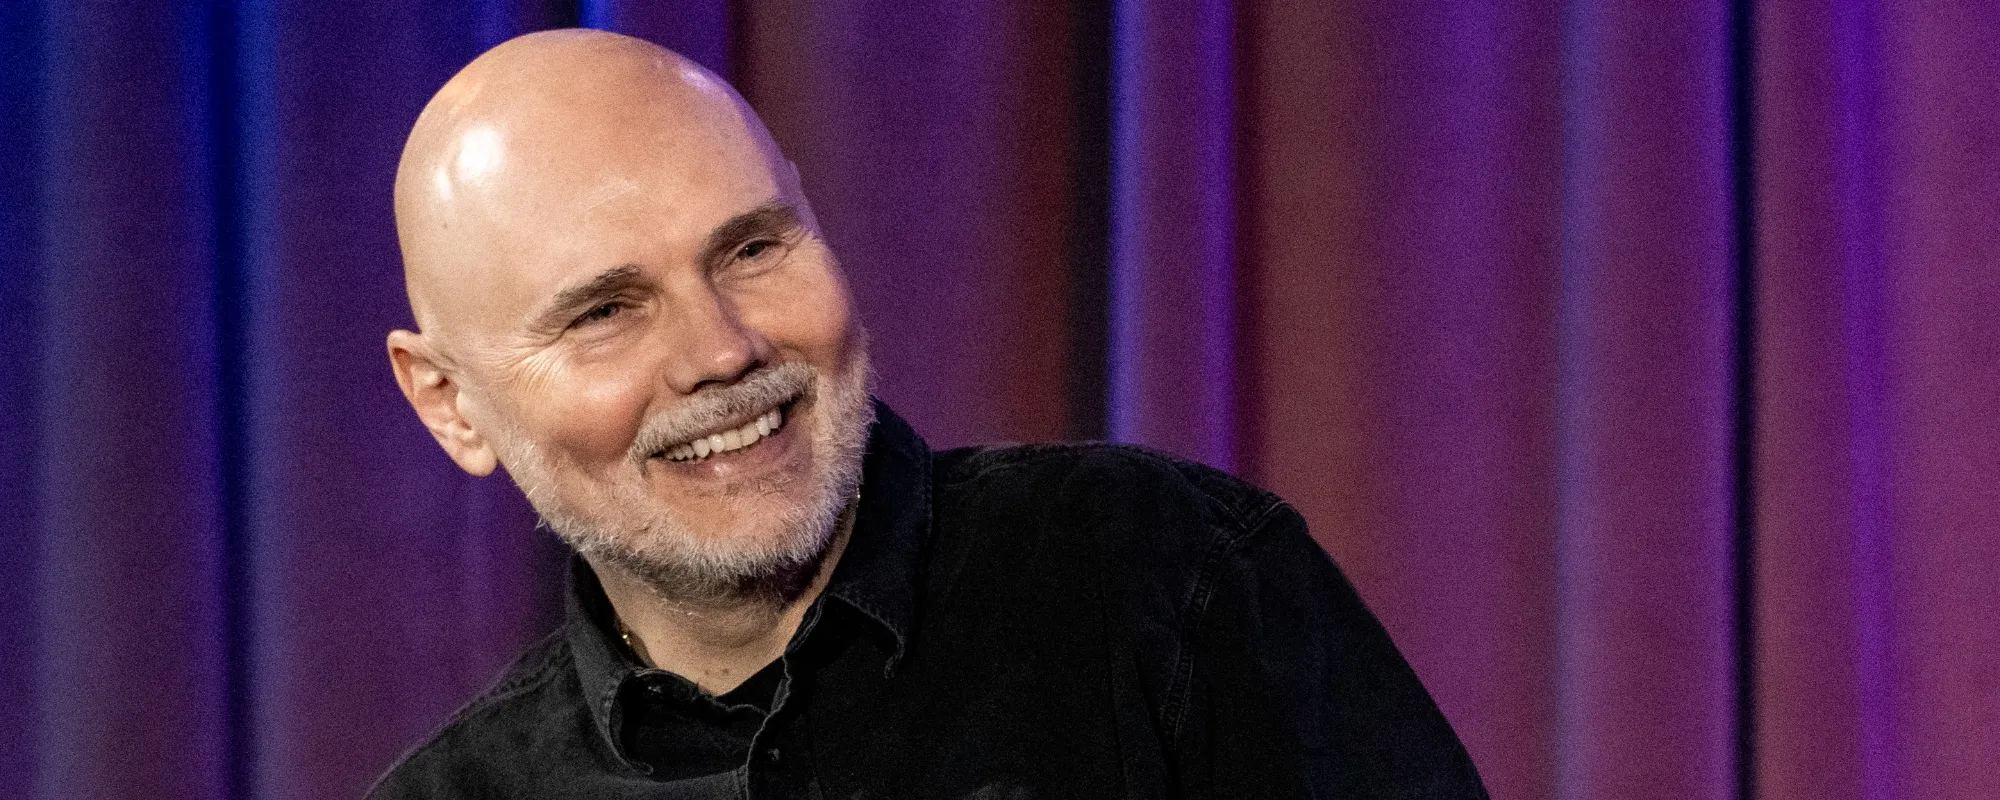 Smashing Pumpkins Frontman Billy Corgan Plans To Restore NWA’s Former Glory in Unscripted Reality Show